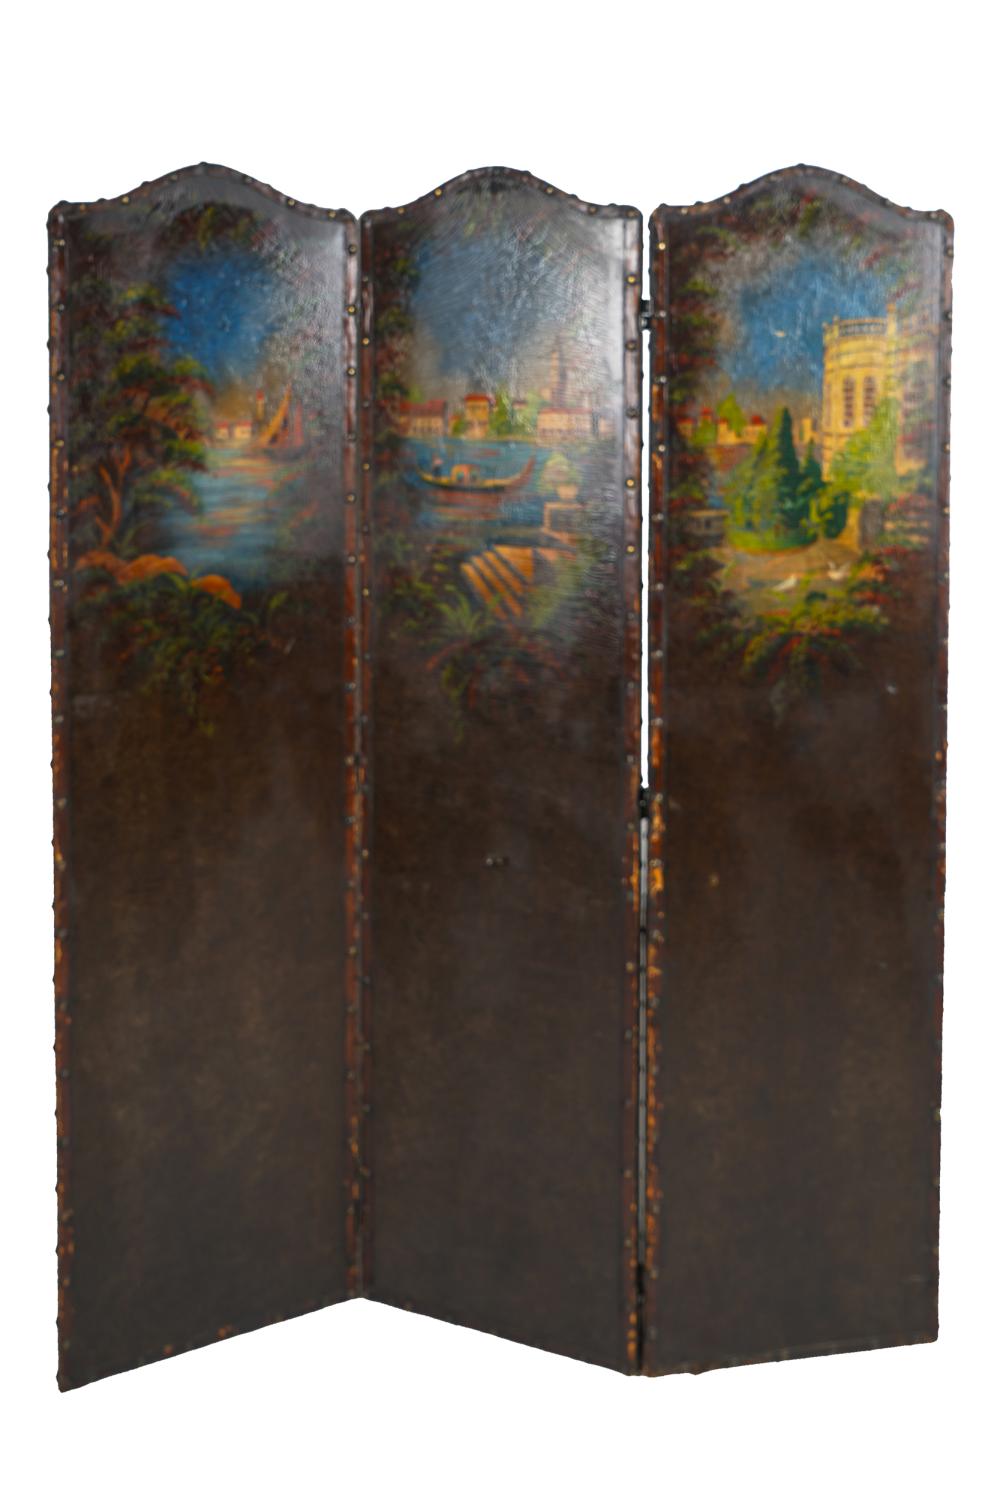 THREE PANEL PAINTED LEATHER SCREENCondition: